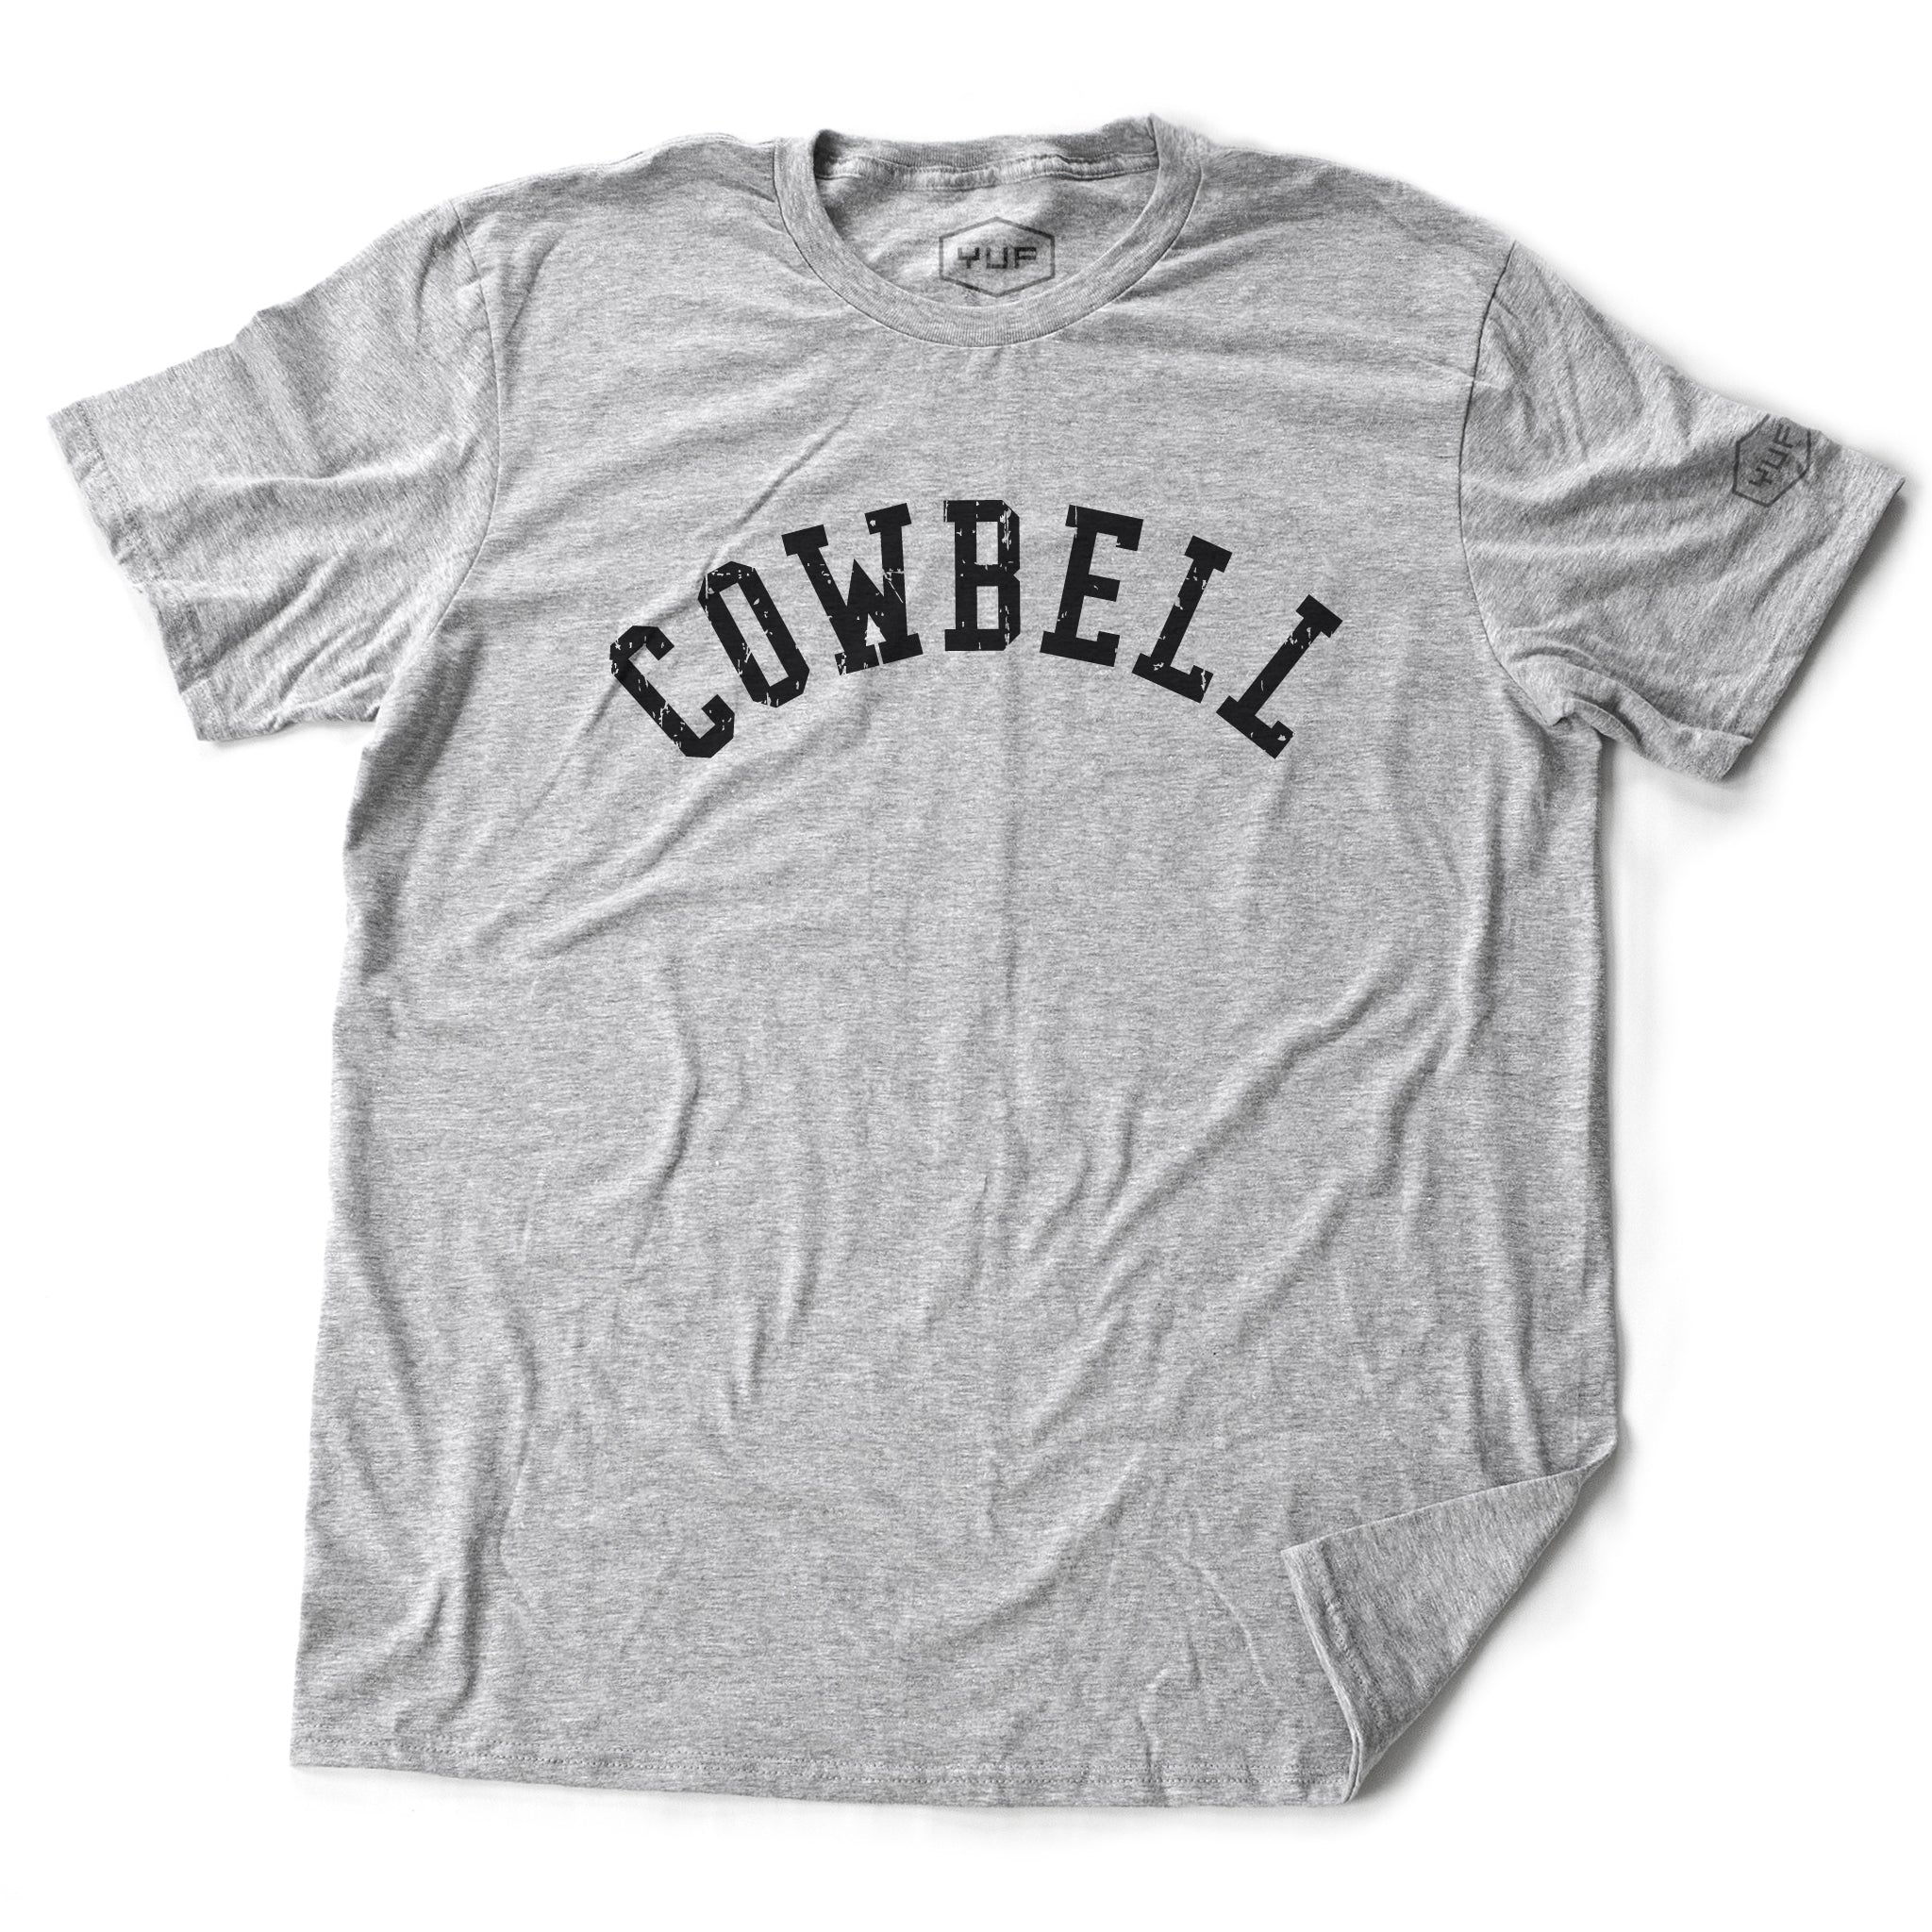 A classic heather gray, retro, college-style t-shirt inspired by the classic Saturday Night Live comedy skit featuring Will Ferrell and Christopher Walken, “I got a fever and the only cure is more Cowbell.” This COWBELL tee is like a Cornell University t-shirt. From fashion brand YUF, available on wolfsaint.net